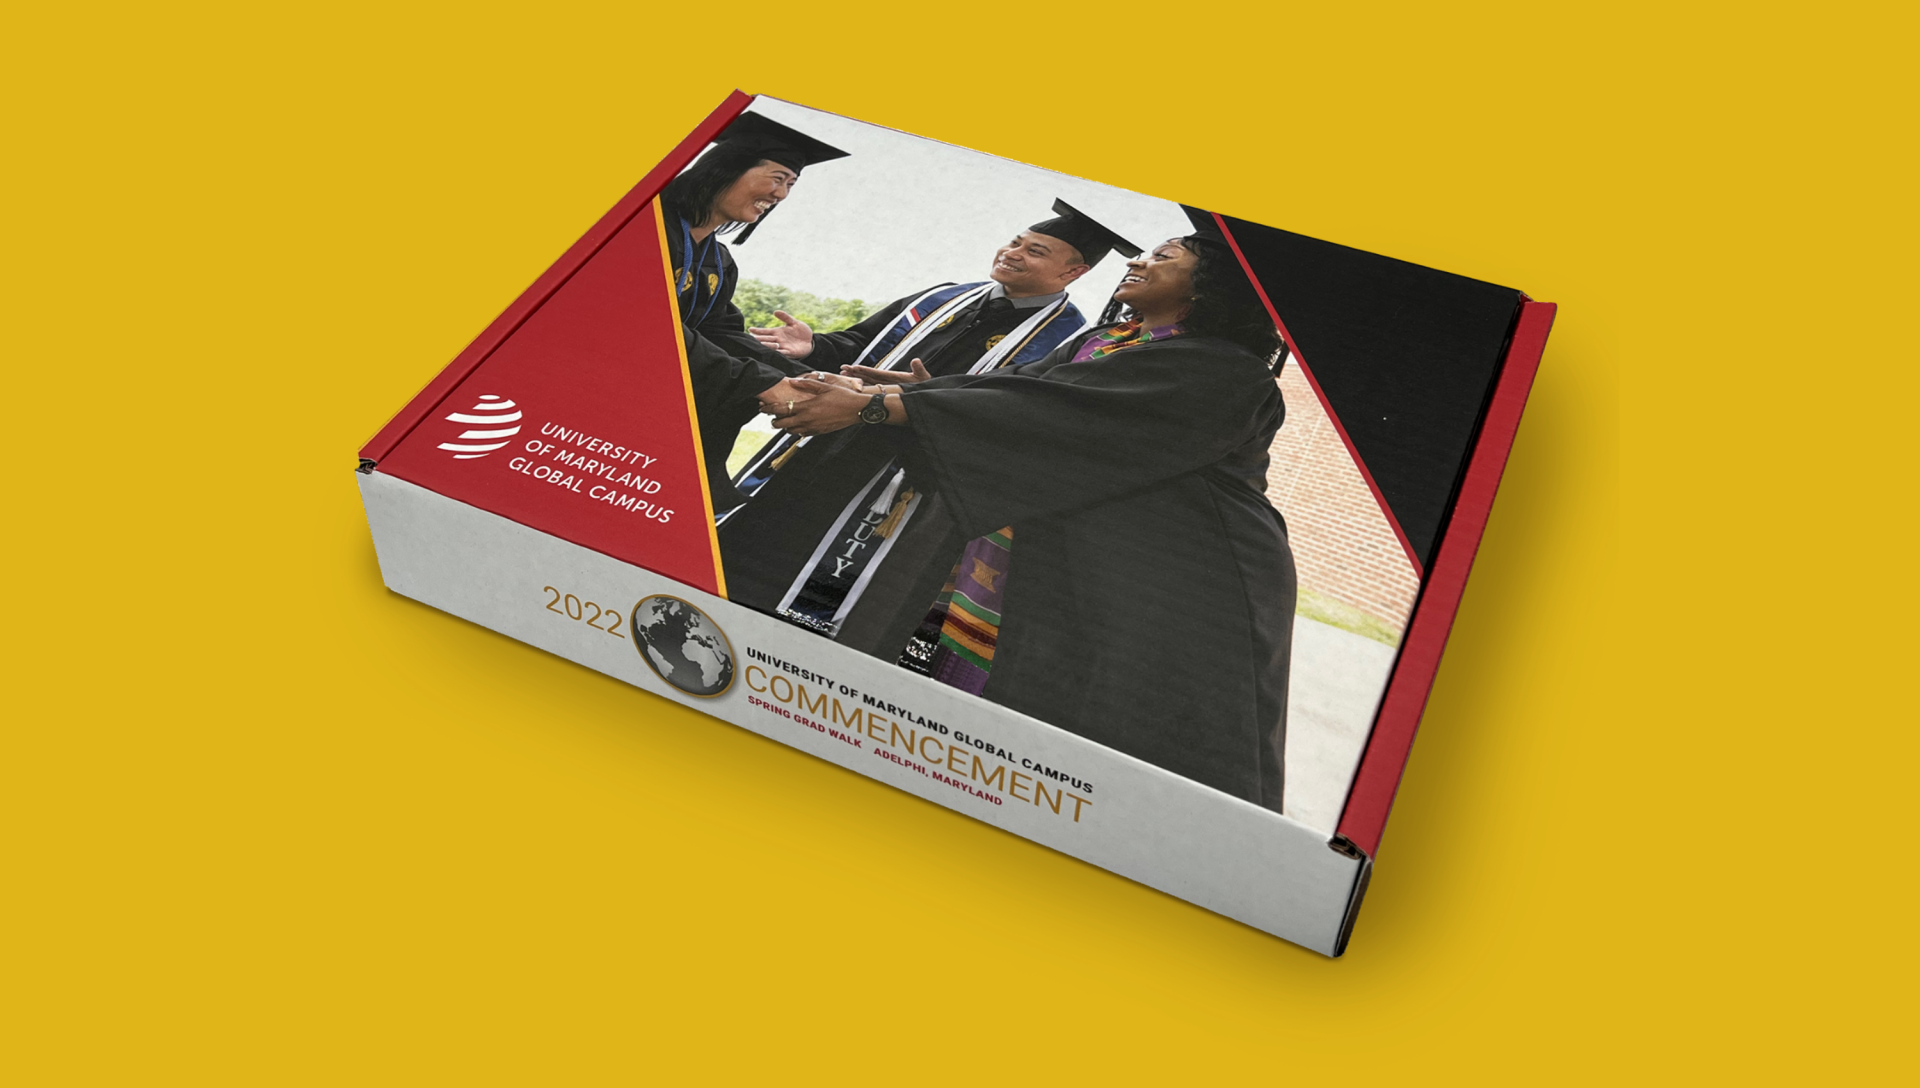 Graduation day: a snapshot of accomplishment and camaraderie, as a new graduate engages in a cheerful interaction with faculty, immortalized on a university's commemorative commencement booklet for the class of